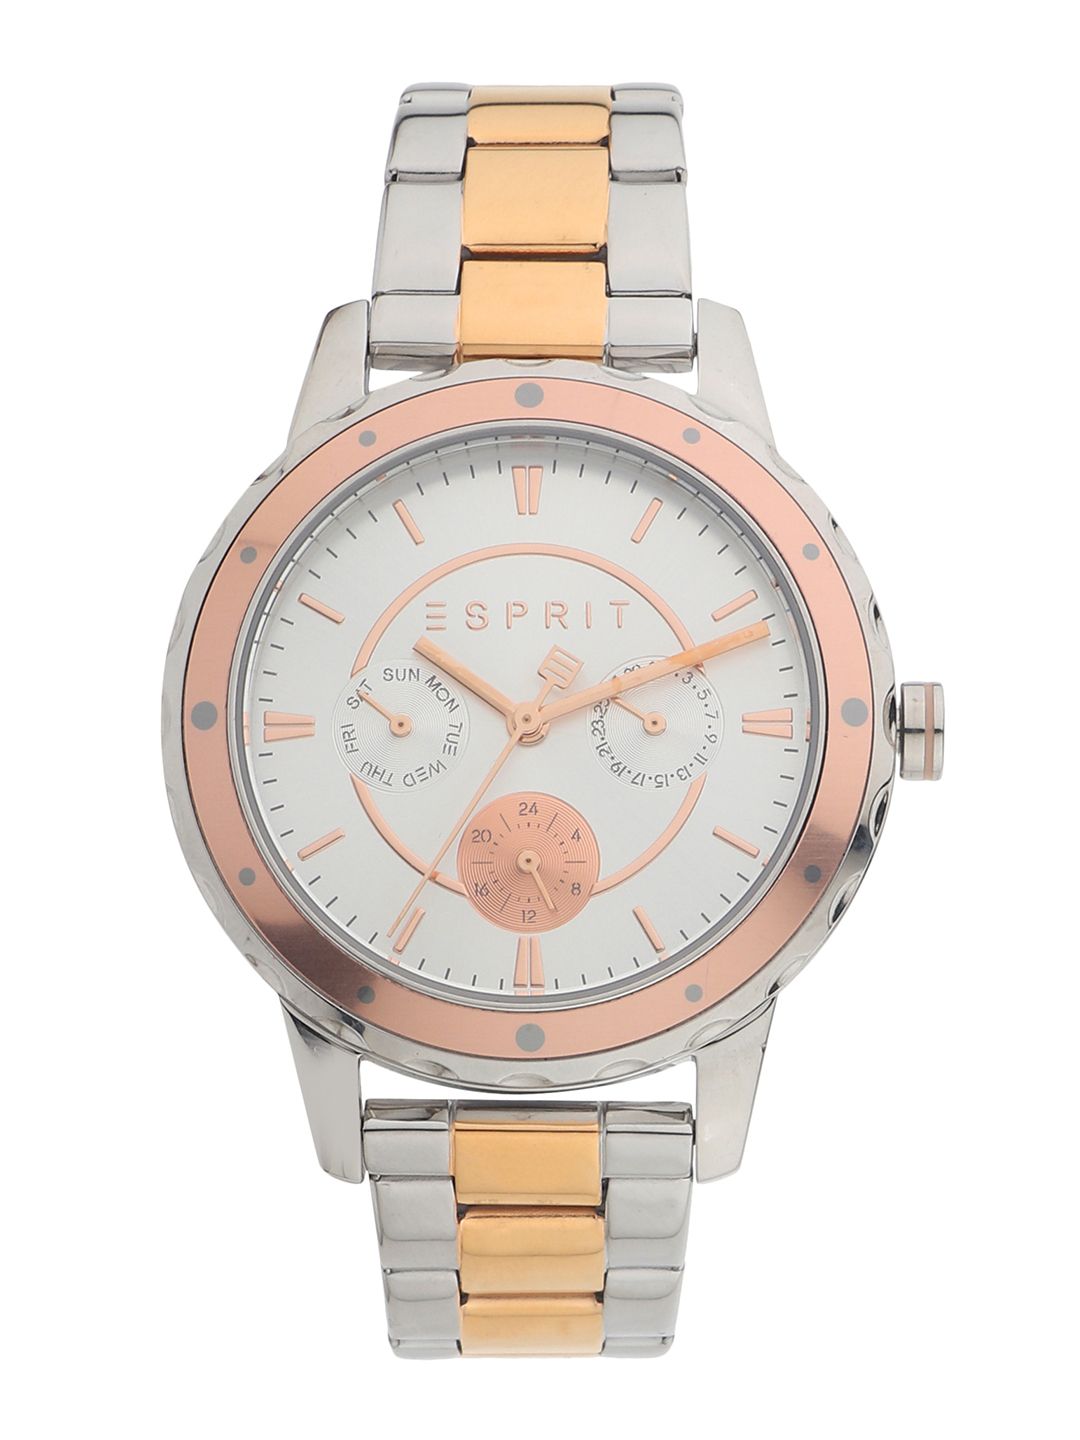 ESPRIT Women Silver-Toned Analogue Watch ES1L140M0135 Price in India